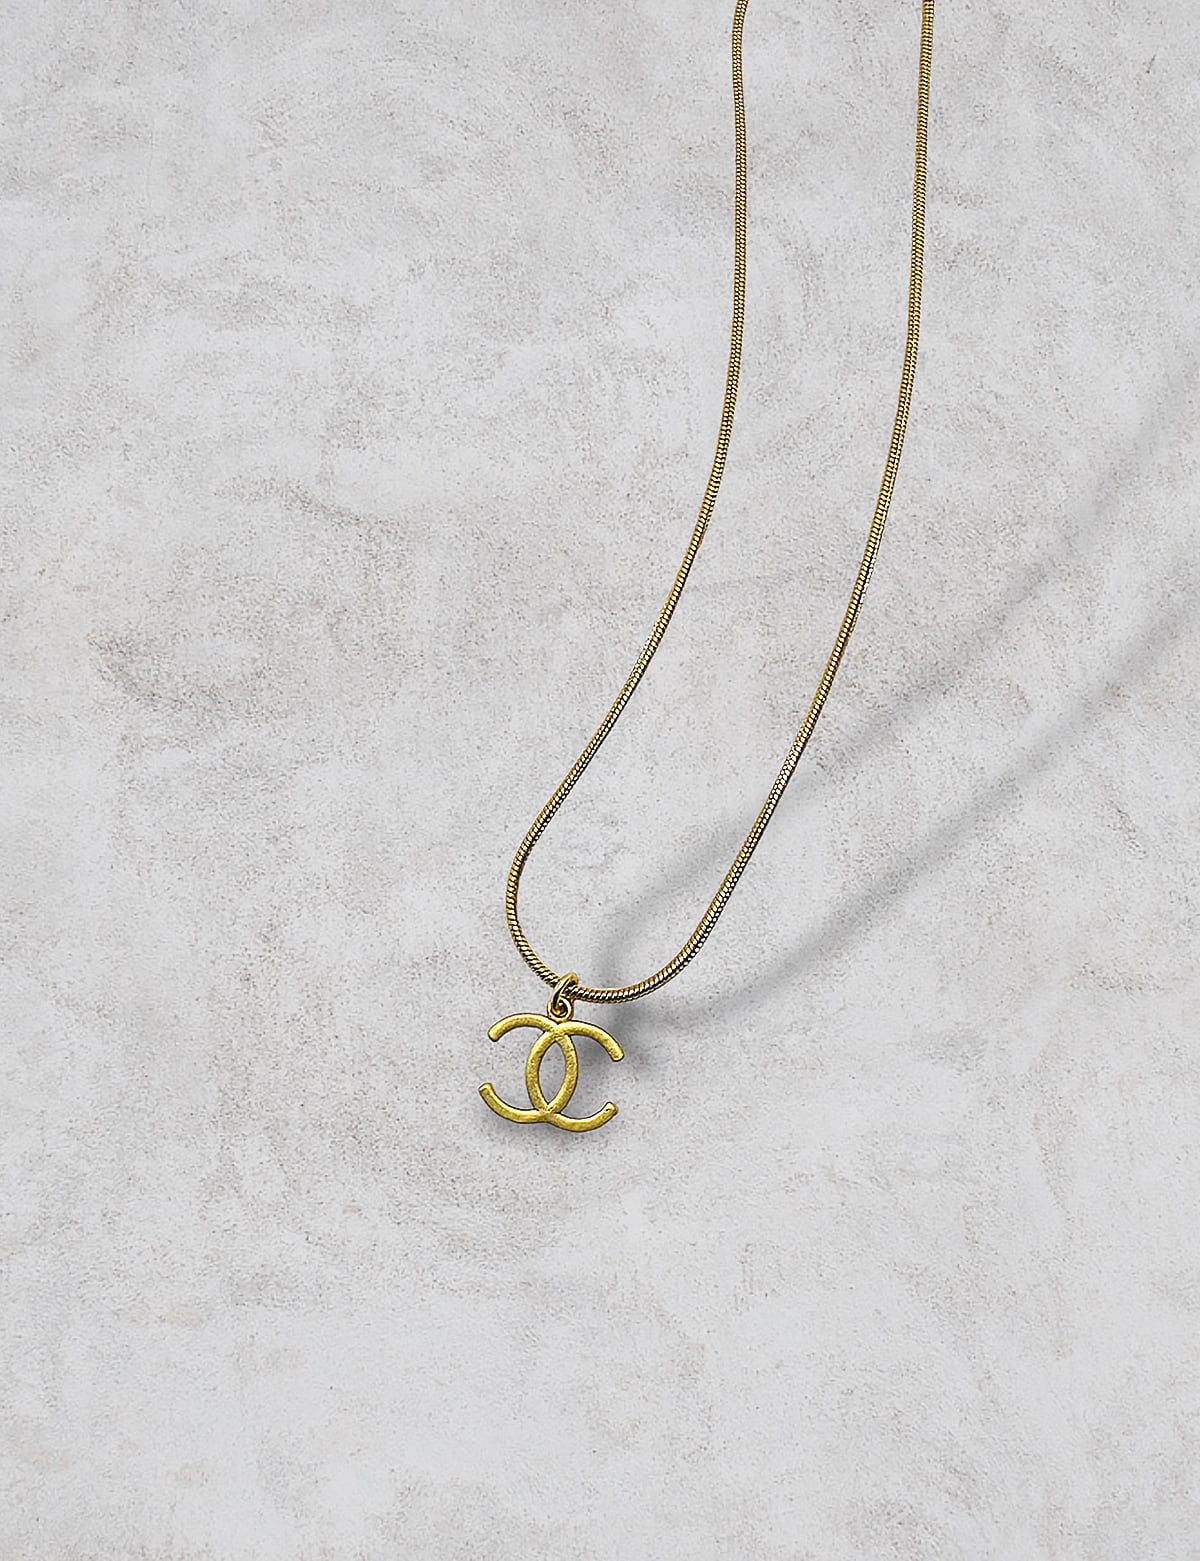 Lustra Chanel necklace